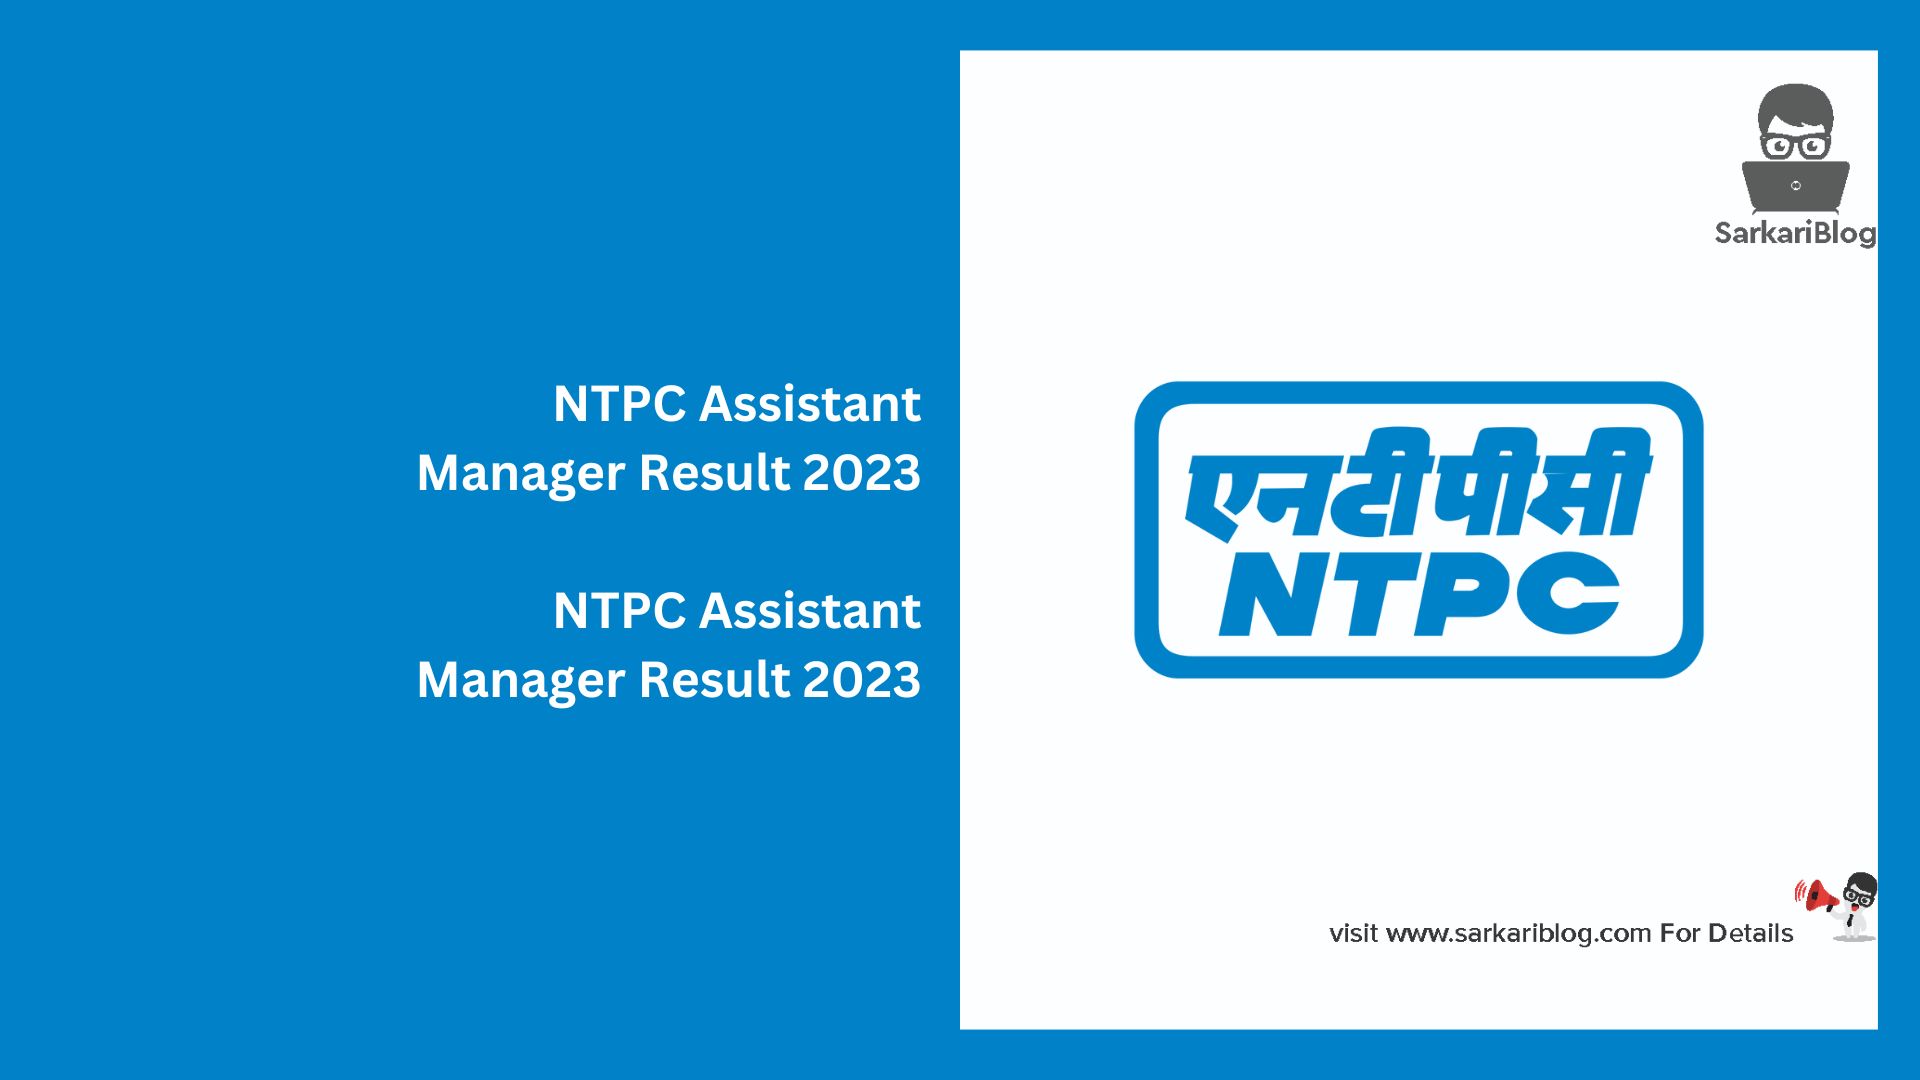 NTPC Assistant Manager Result 2023